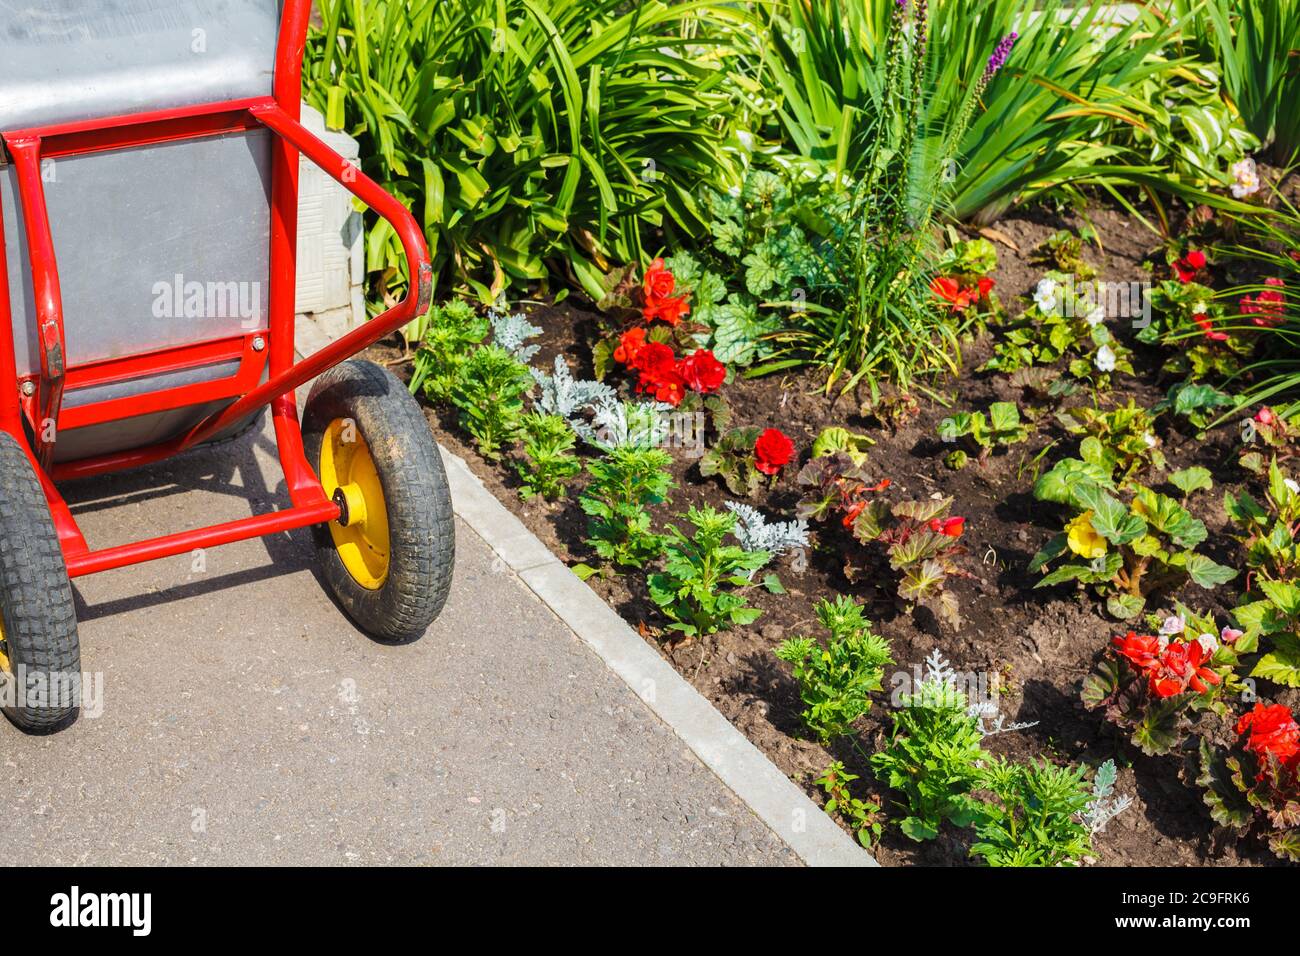 Metallic wheelbarrow with red handles and yellow wheels standing near blooming flower bed closeup. Stock Photo